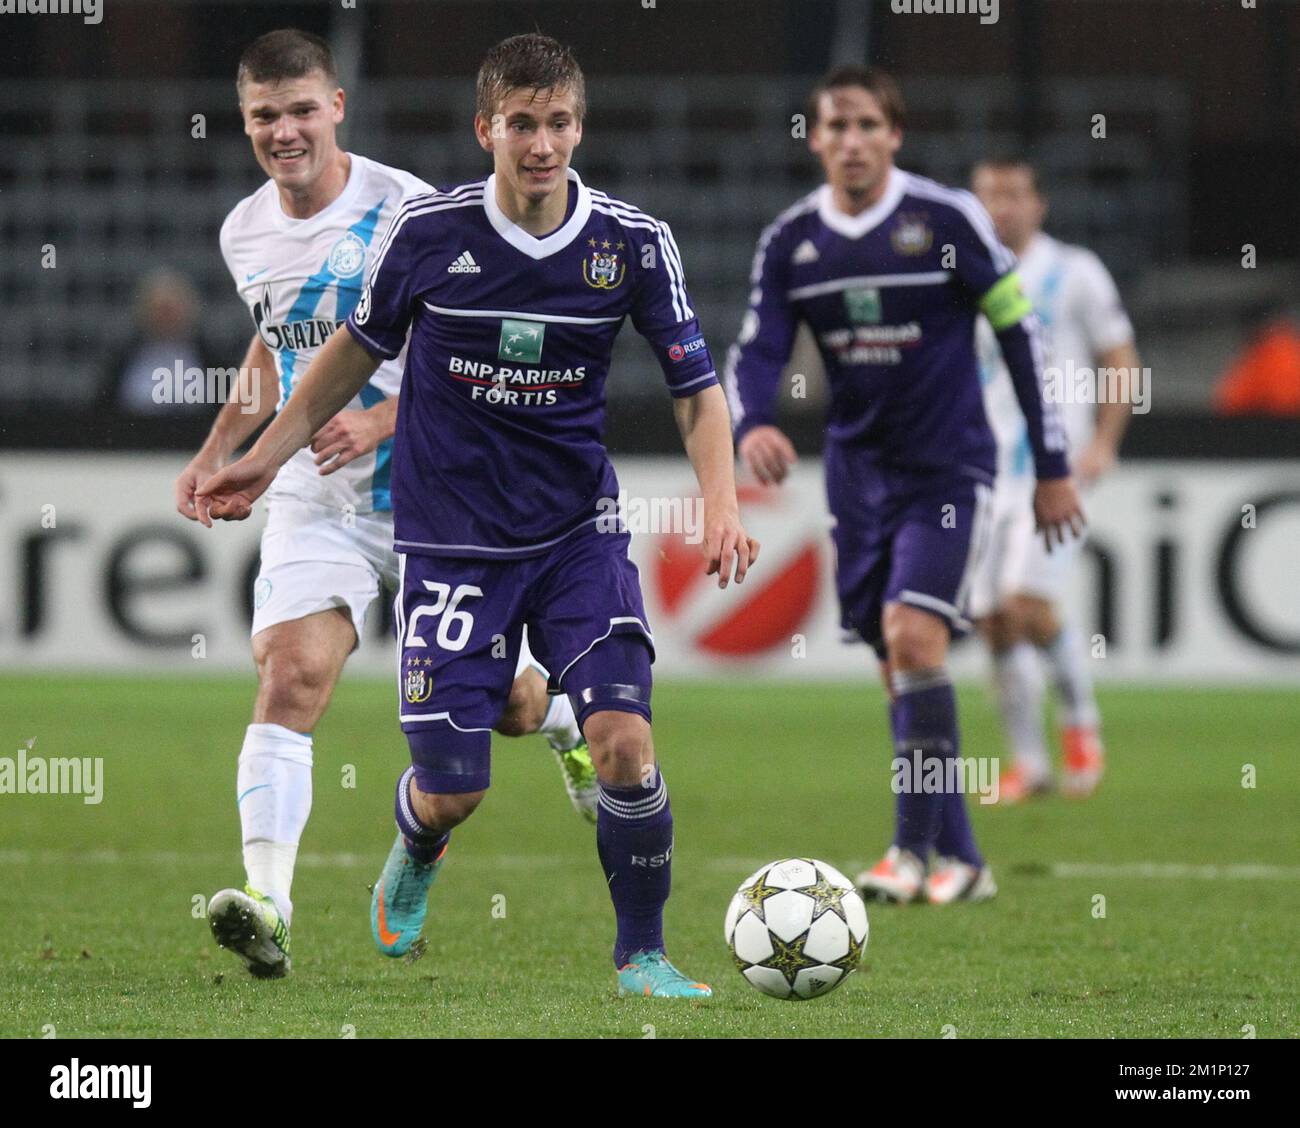 20121106 - BRUSSELS, BELGIUM: Zenit's Igor Denisov and Anderlecht's Dennis Praet fight for the ball during the match between Belgian first division soccer team RSC Anderlecht and Russian team FC Zenit Saint Petersburg in group C of the UEFA Champions League tournament, Tuesday 06 November 2012 in Brussels. BELGA PHOTO VIRGINIE LEFOUR Stock Photo